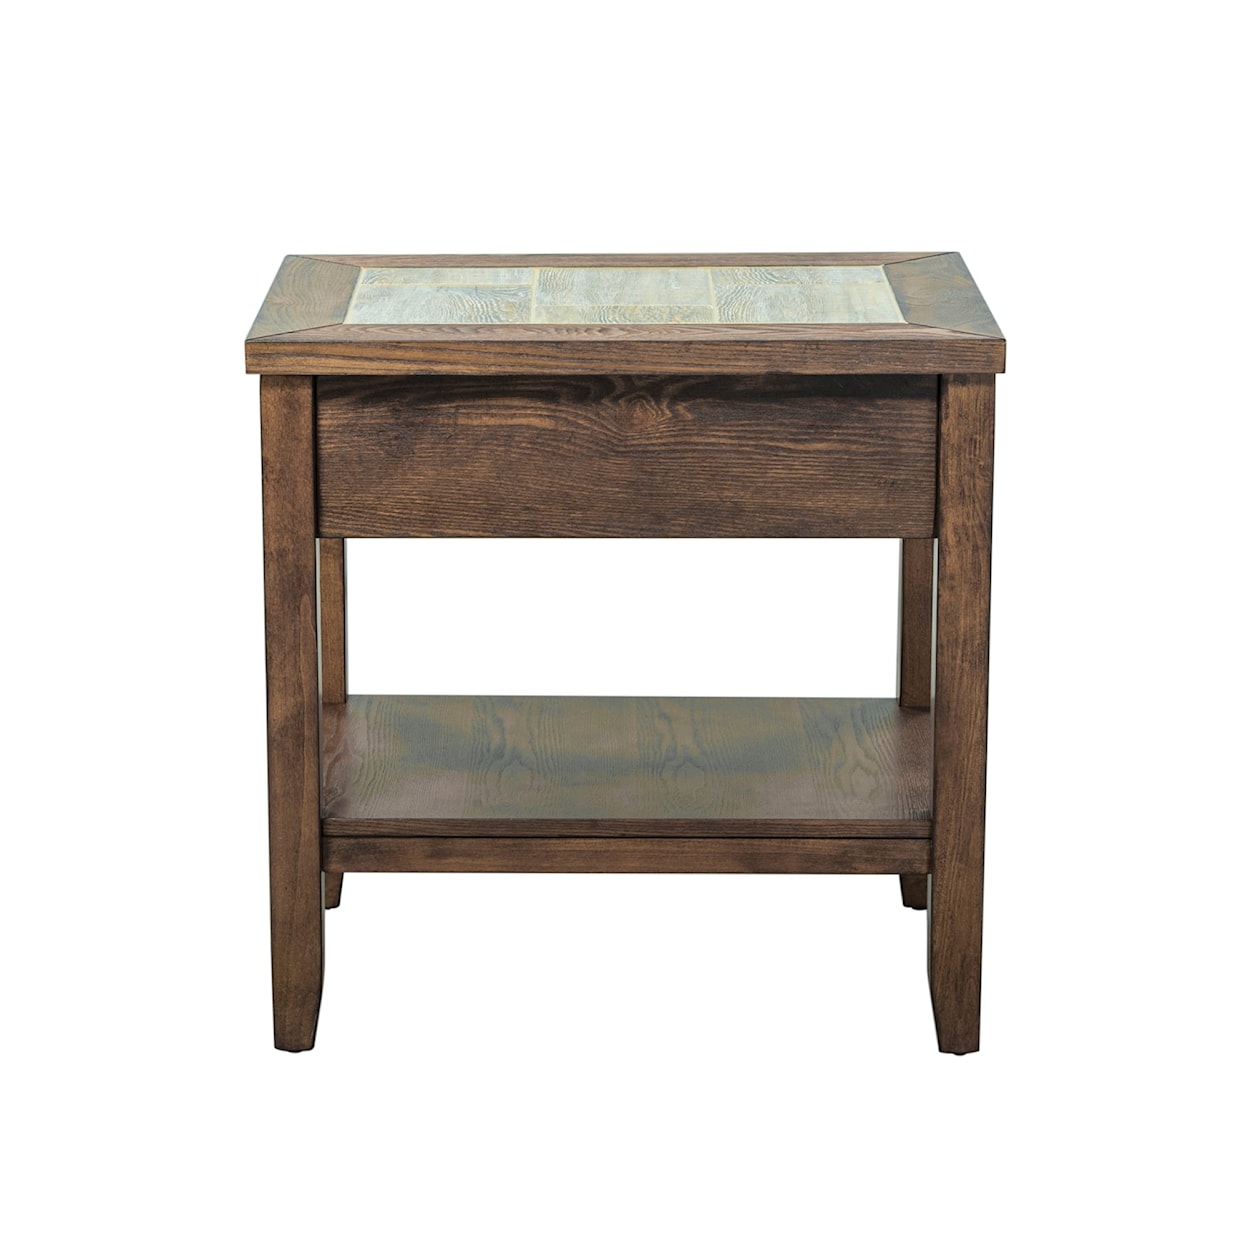 Libby Phoenix Chair Side Table